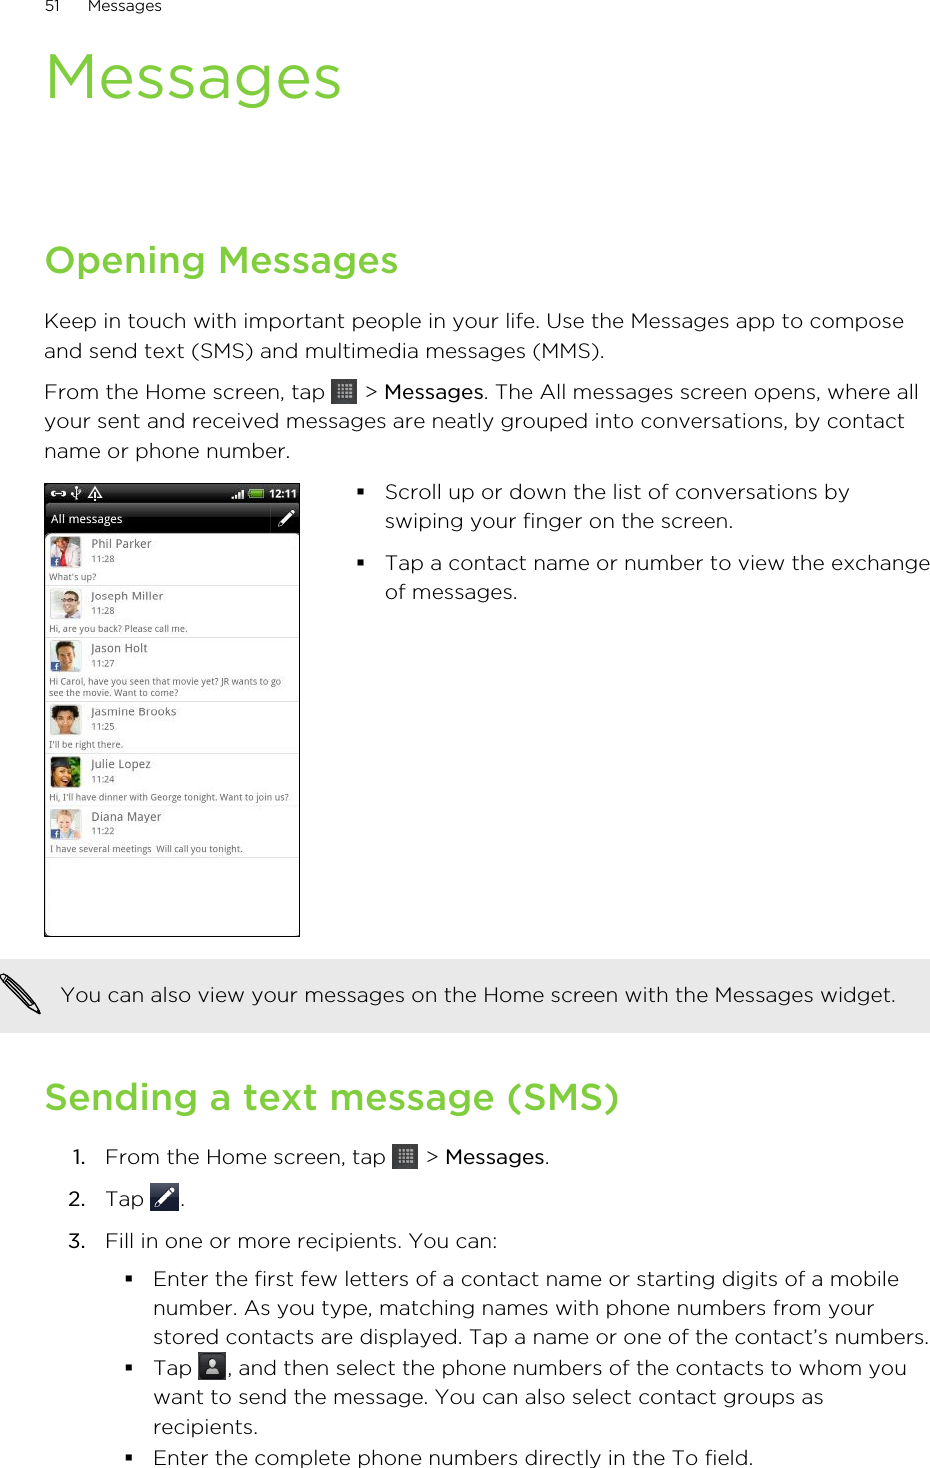 MessagesOpening MessagesKeep in touch with important people in your life. Use the Messages app to composeand send text (SMS) and multimedia messages (MMS).From the Home screen, tap   &gt; Messages. The All messages screen opens, where allyour sent and received messages are neatly grouped into conversations, by contactname or phone number.§Scroll up or down the list of conversations byswiping your finger on the screen.§Tap a contact name or number to view the exchangeof messages.You can also view your messages on the Home screen with the Messages widget.Sending a text message (SMS)1. From the Home screen, tap   &gt; Messages.2. Tap  .3. Fill in one or more recipients. You can:§Enter the first few letters of a contact name or starting digits of a mobilenumber. As you type, matching names with phone numbers from yourstored contacts are displayed. Tap a name or one of the contact’s numbers.§Tap  , and then select the phone numbers of the contacts to whom youwant to send the message. You can also select contact groups asrecipients.§Enter the complete phone numbers directly in the To field.51 Messages